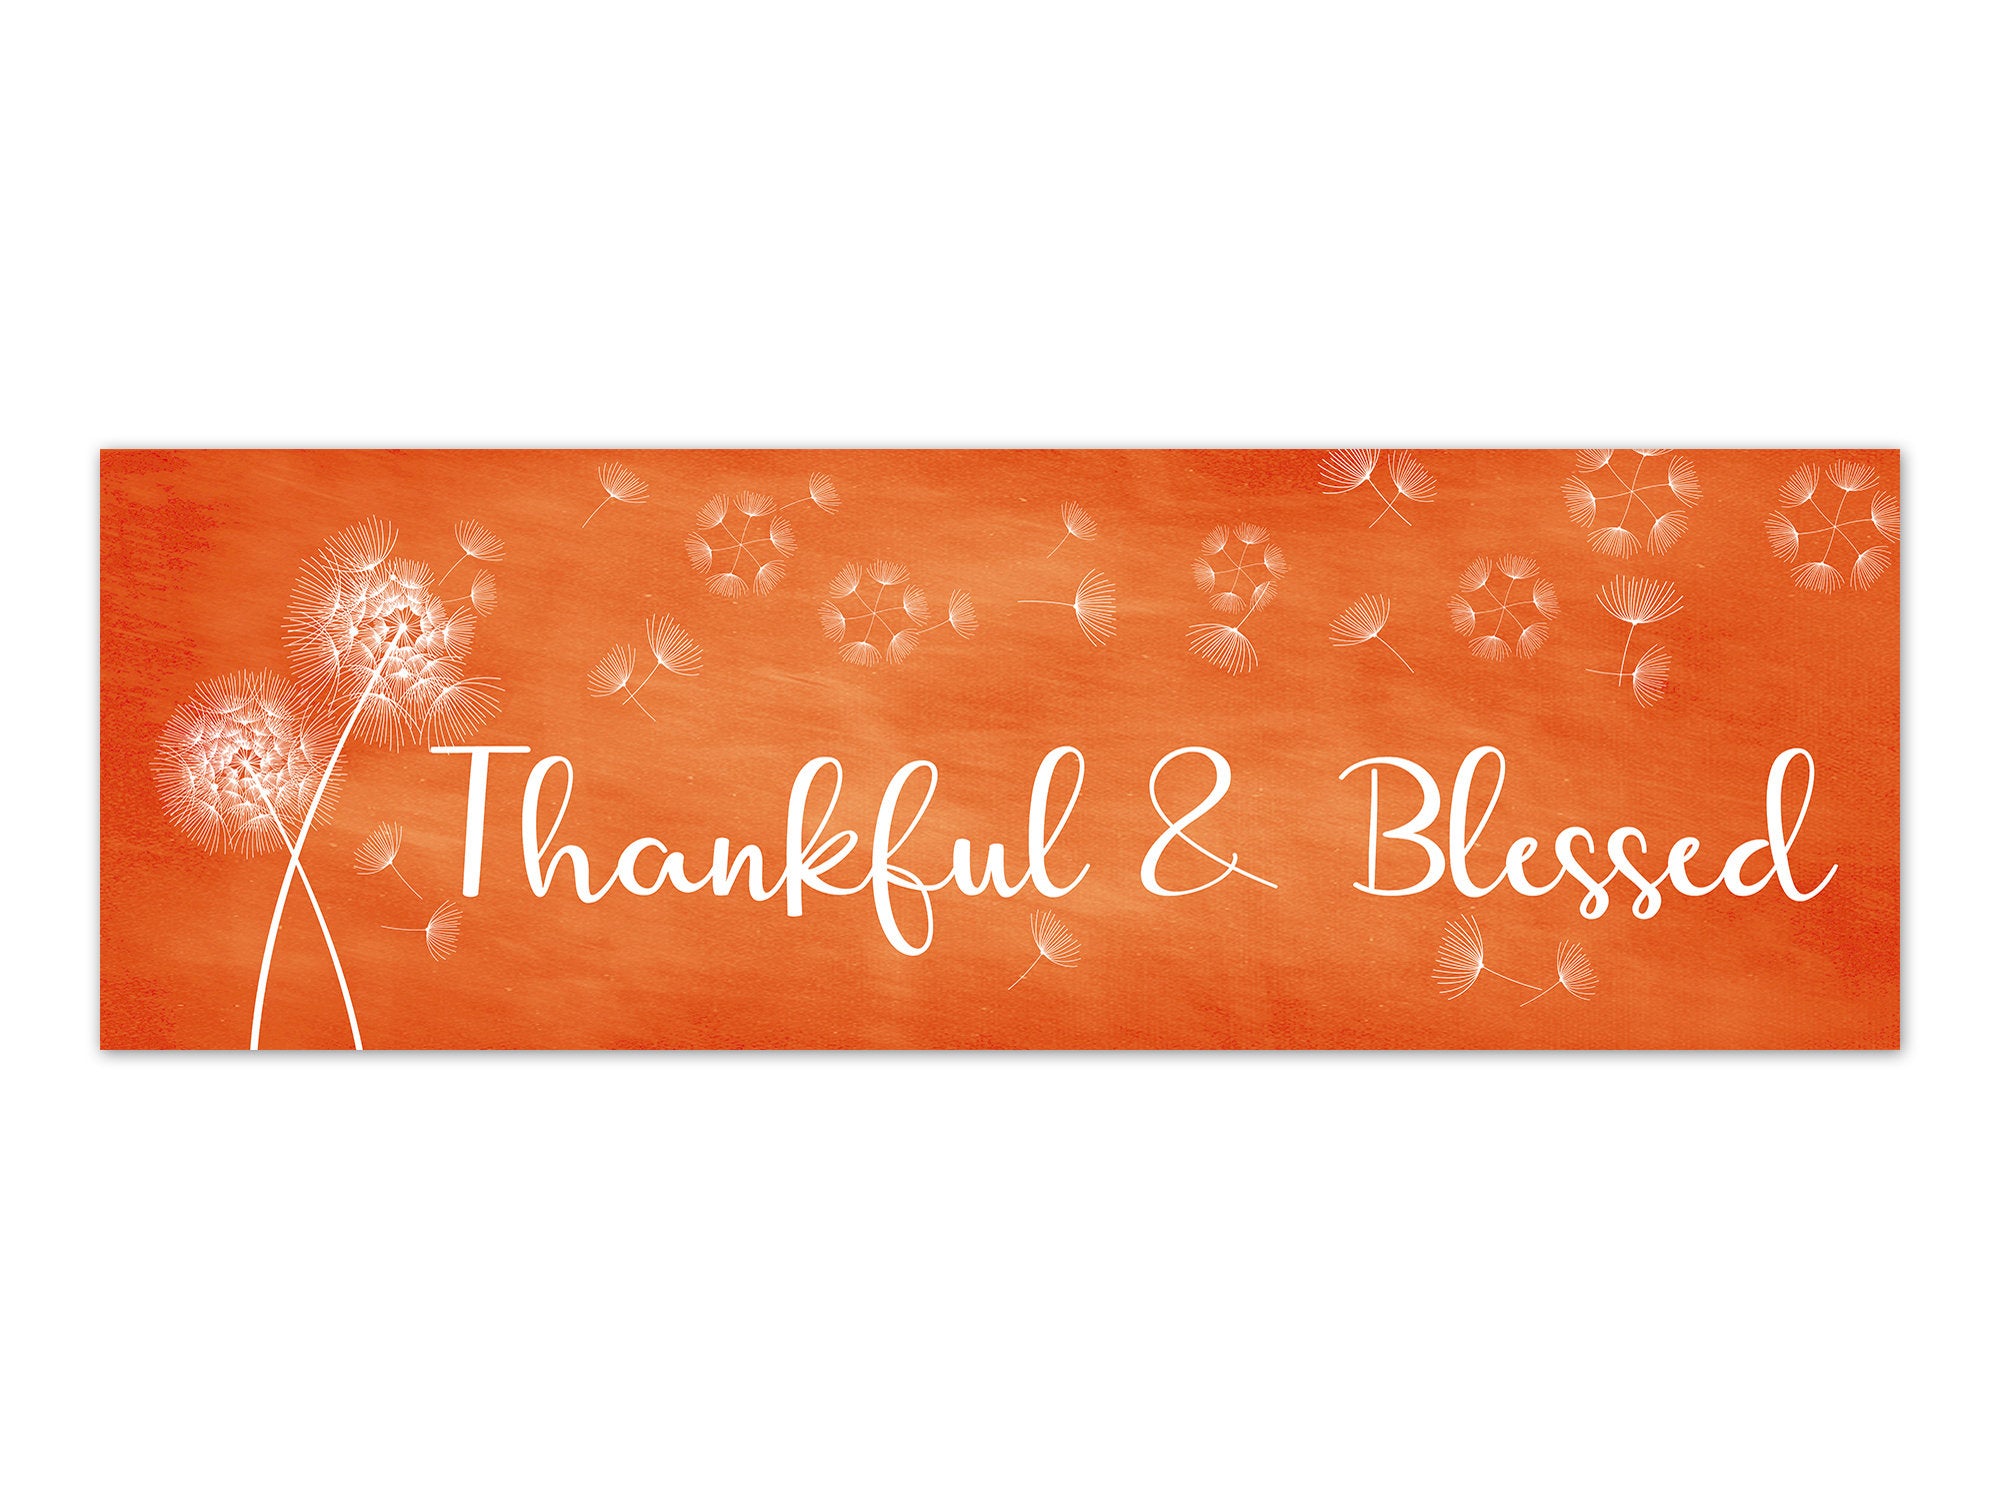 Orange Family Blessing Panoramic Wall Art "Thankful and Blessed" with Blowing Dandelion - HOME580